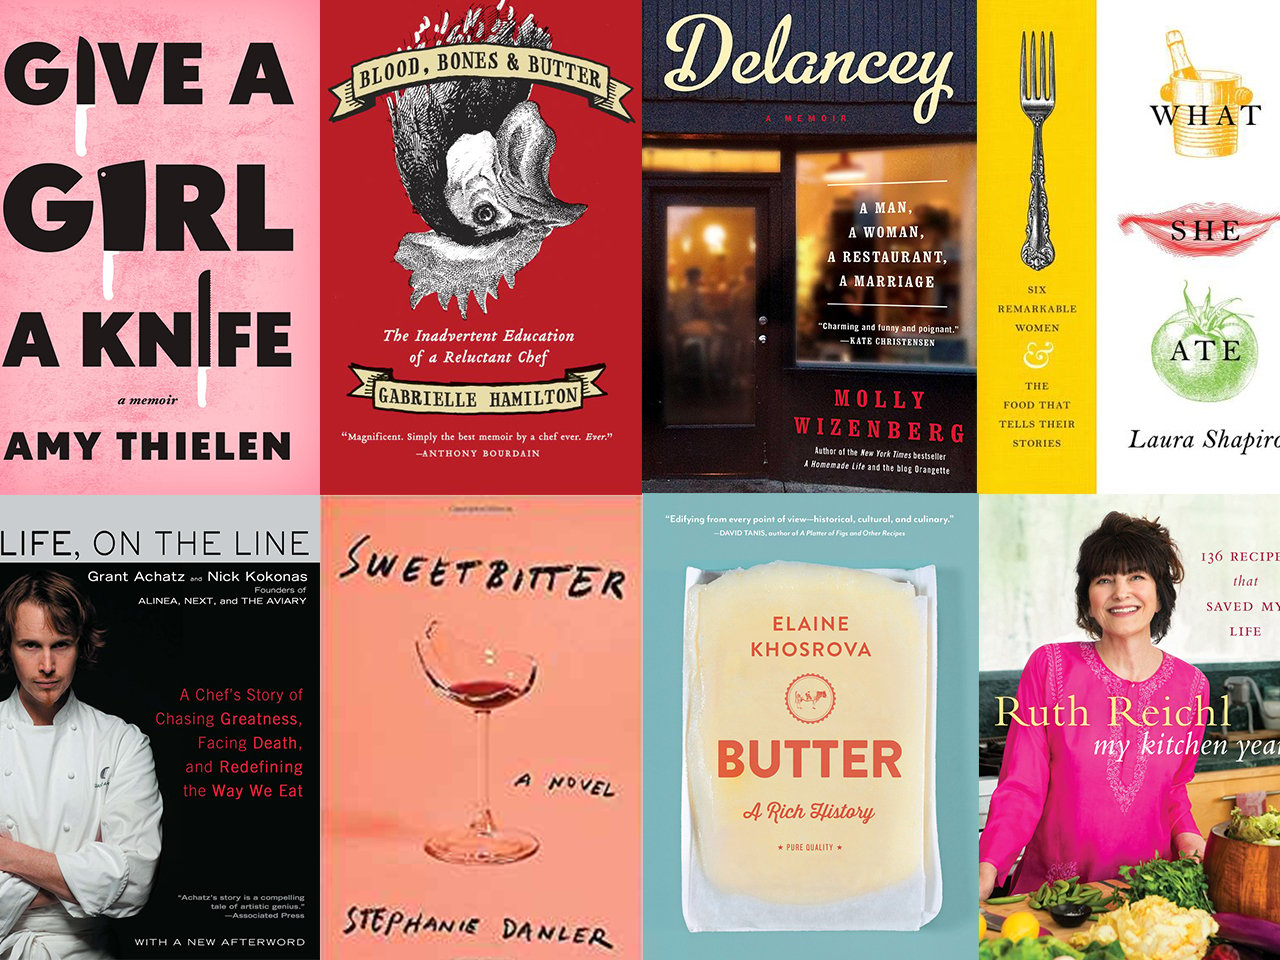 Summer food books: fiction and non-fiction books from Margaret Atwood (The Edible Woman) to Anthony Bourdain's Kitchen confidential